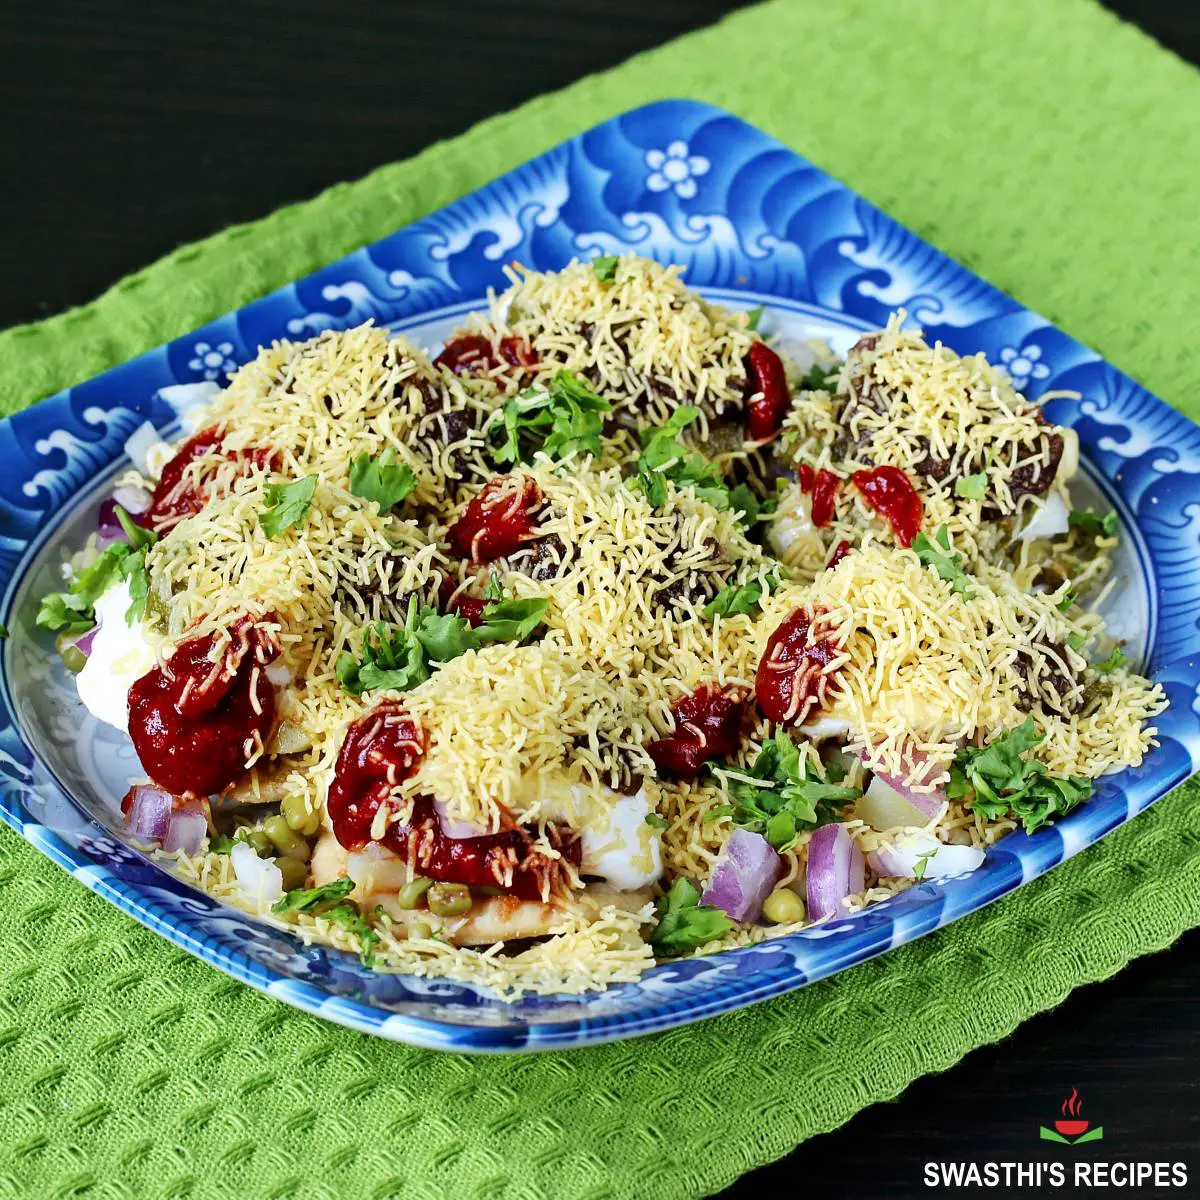 Papdi chaat served in a blue plate